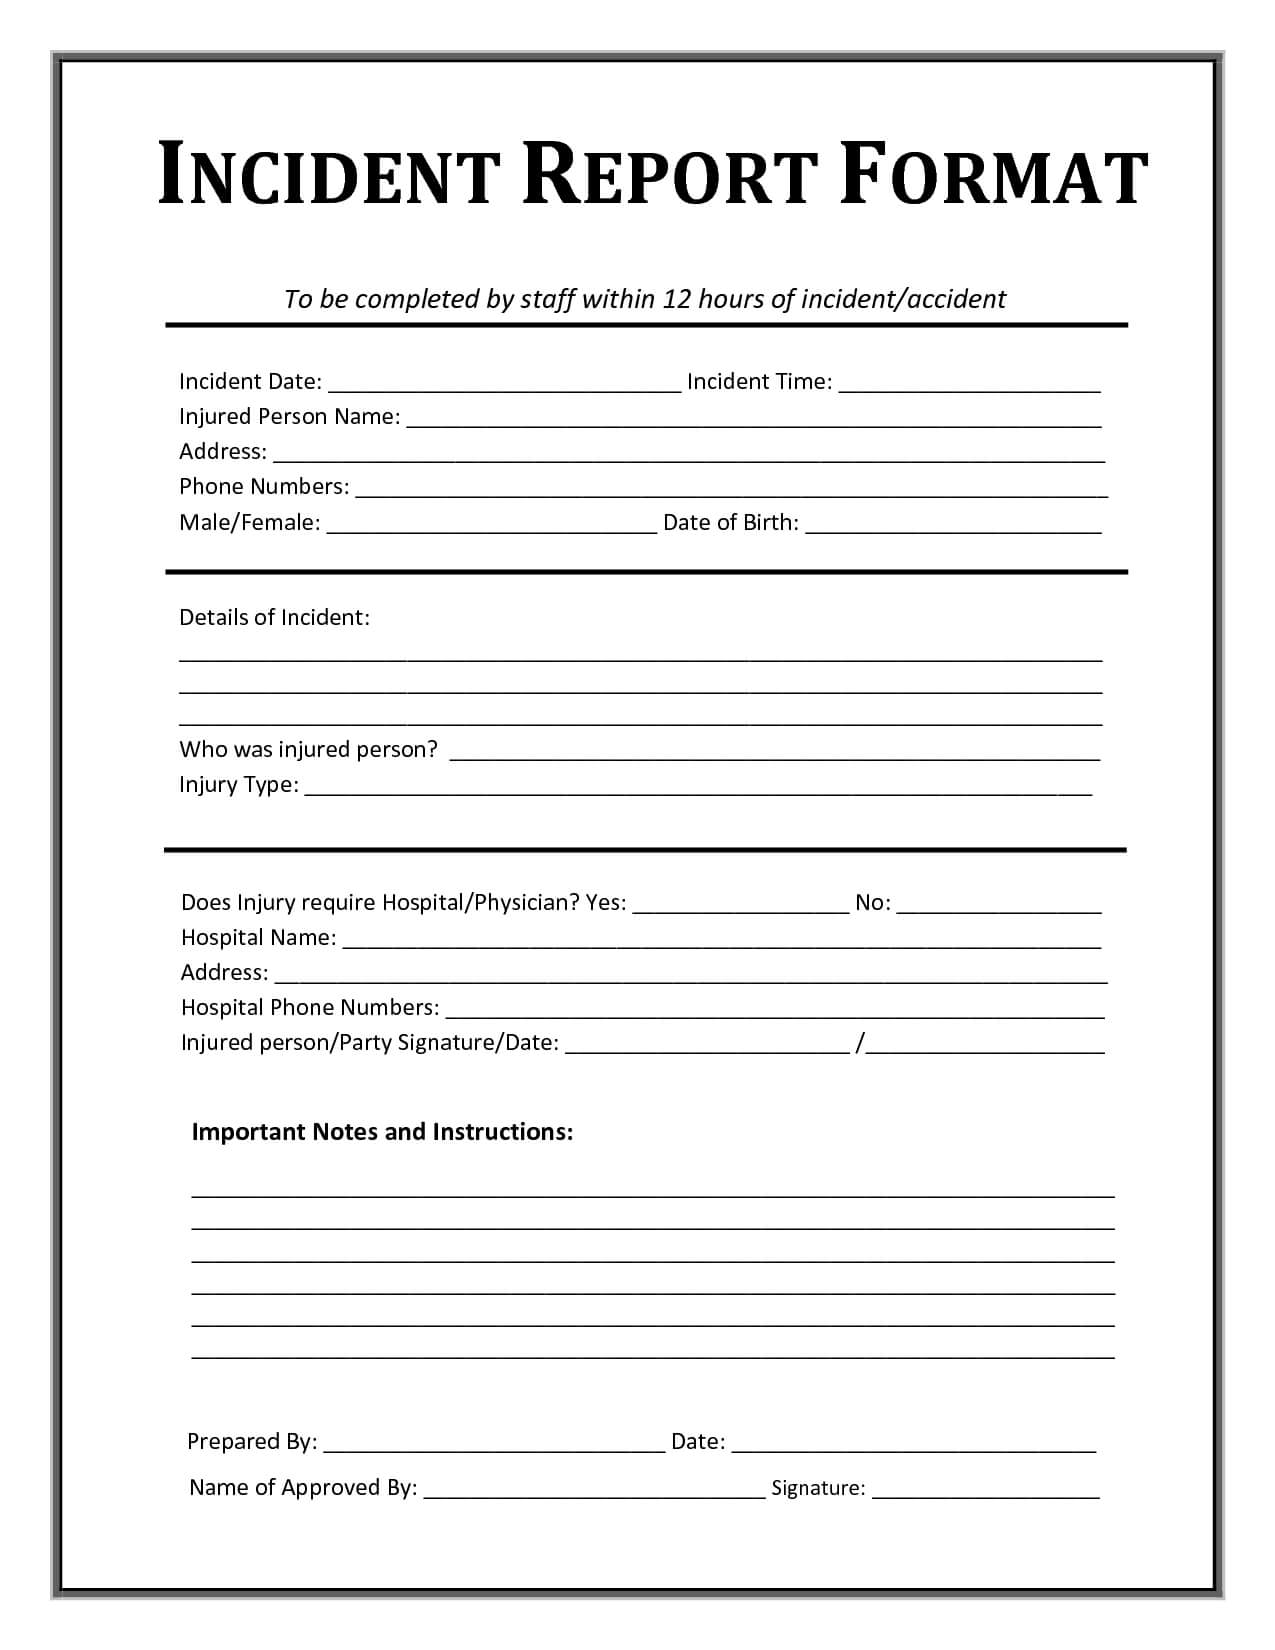 Incident Report Form Template Microsoft Excel | Report For Office Incident Report Template